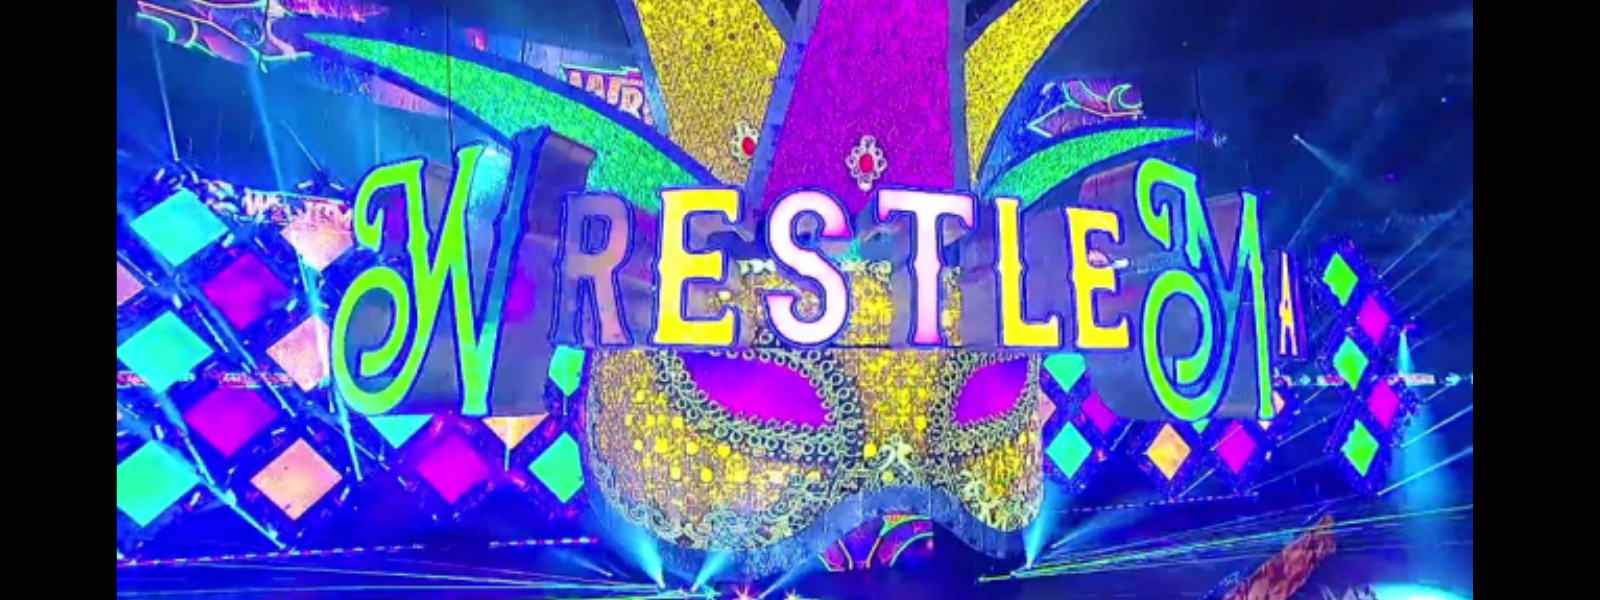 All you need to know about WWE WreslteMania 34 